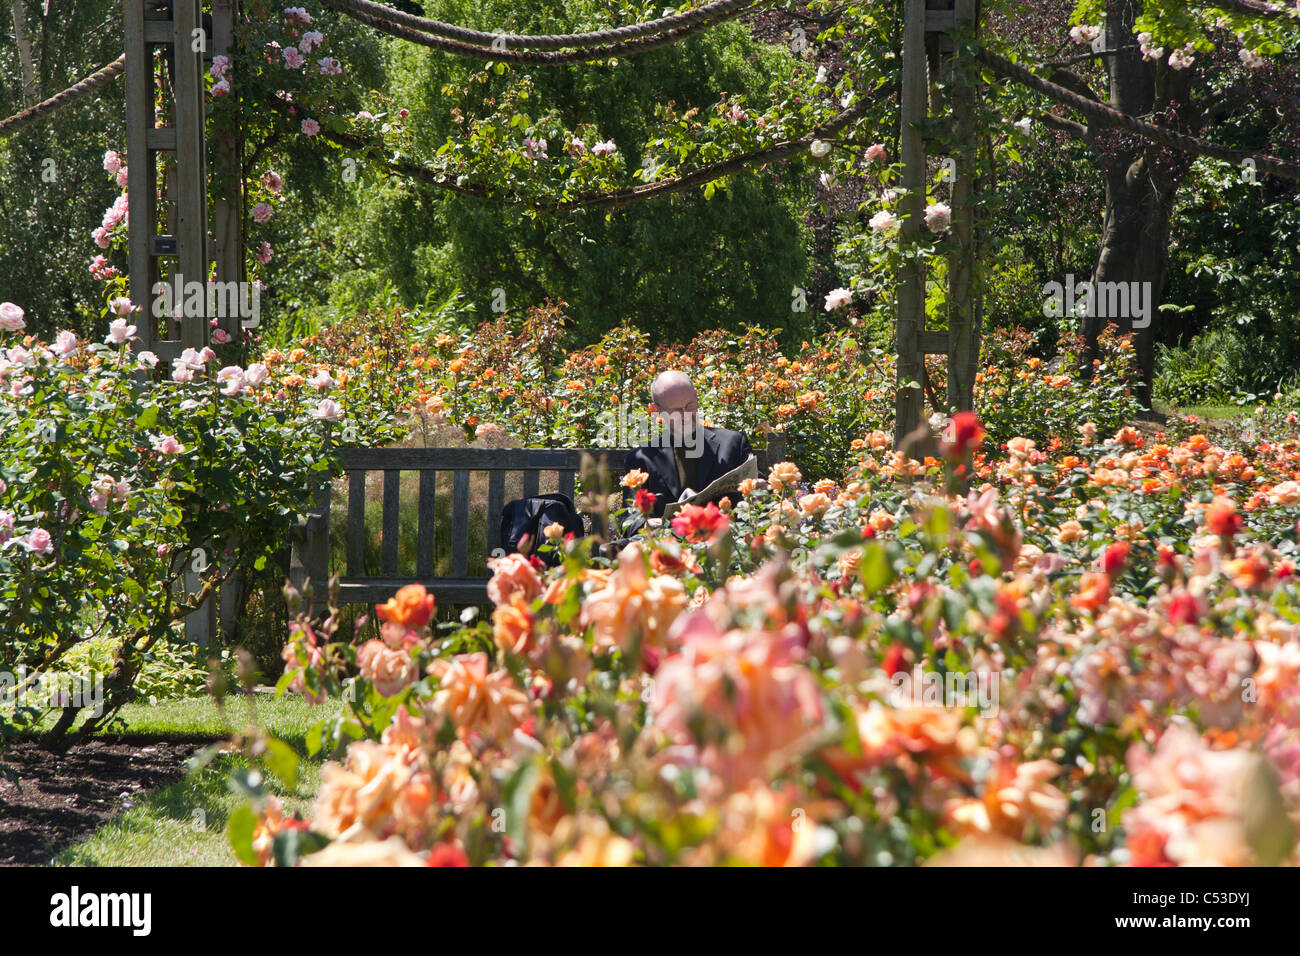 Man reading sitting on a bench surrounded by roses Stock Photo